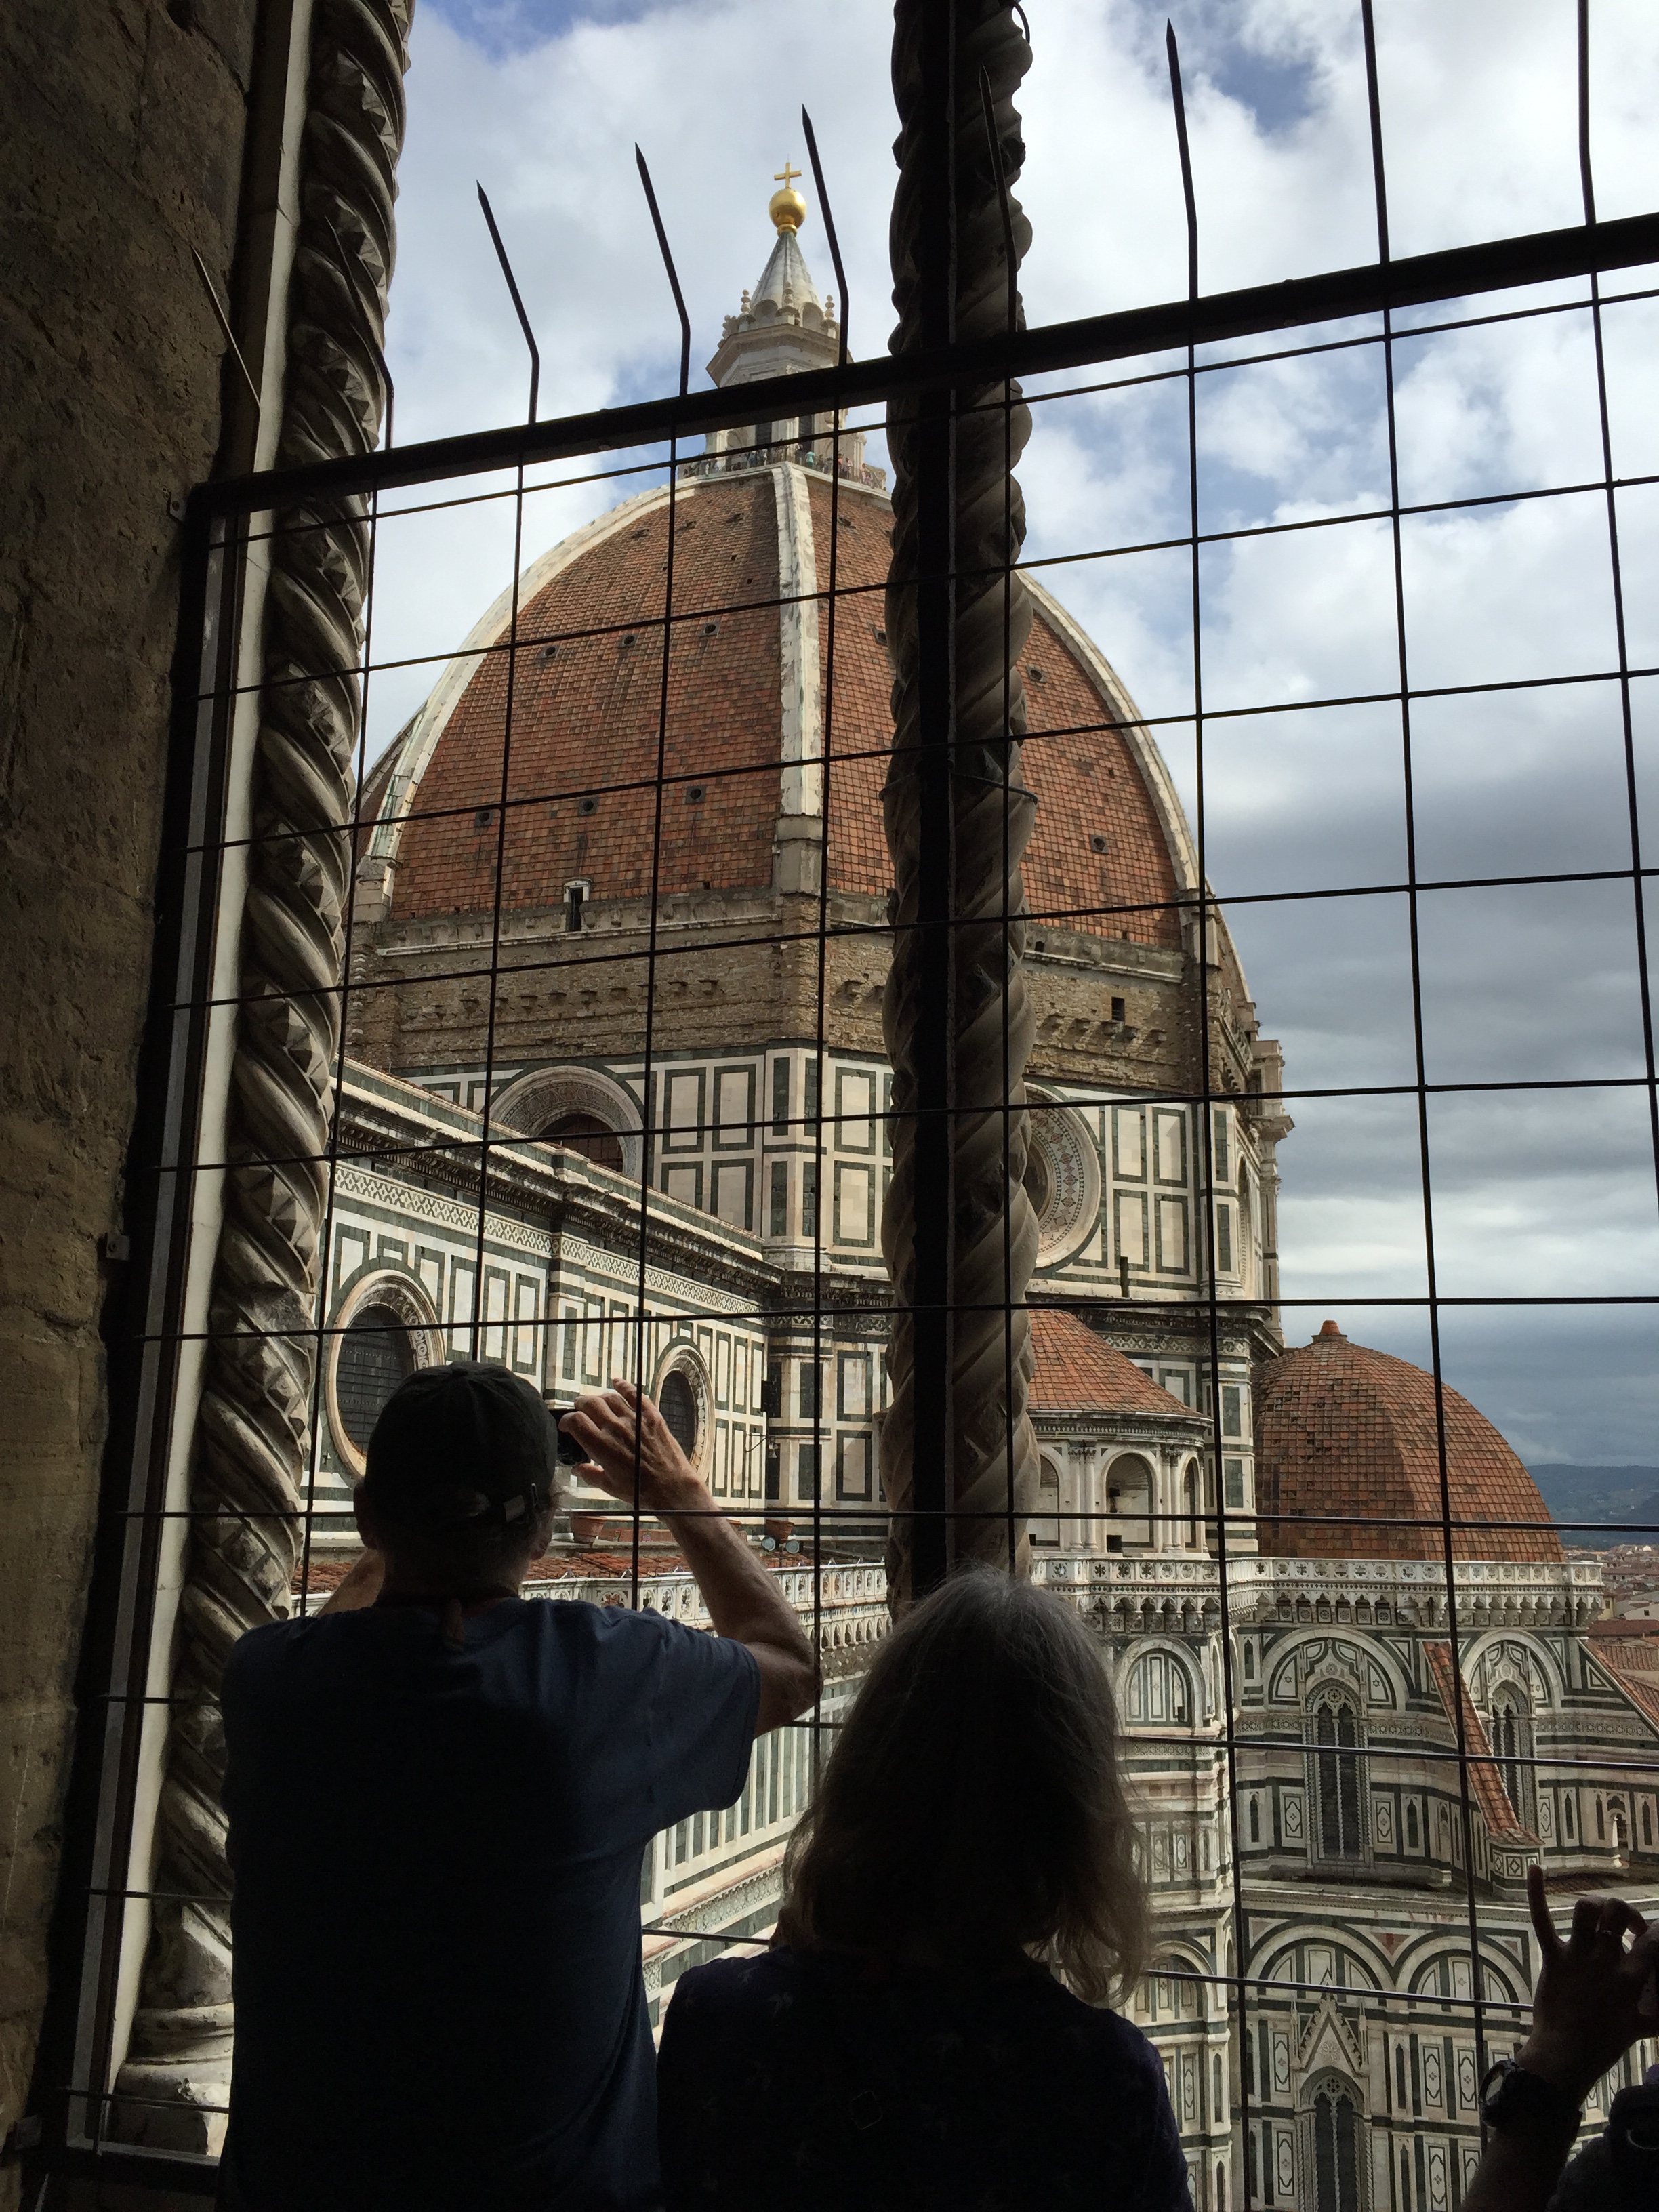 A view of the cathedral of Santa Maria del Fiore from halfway up Giotto's bell tower